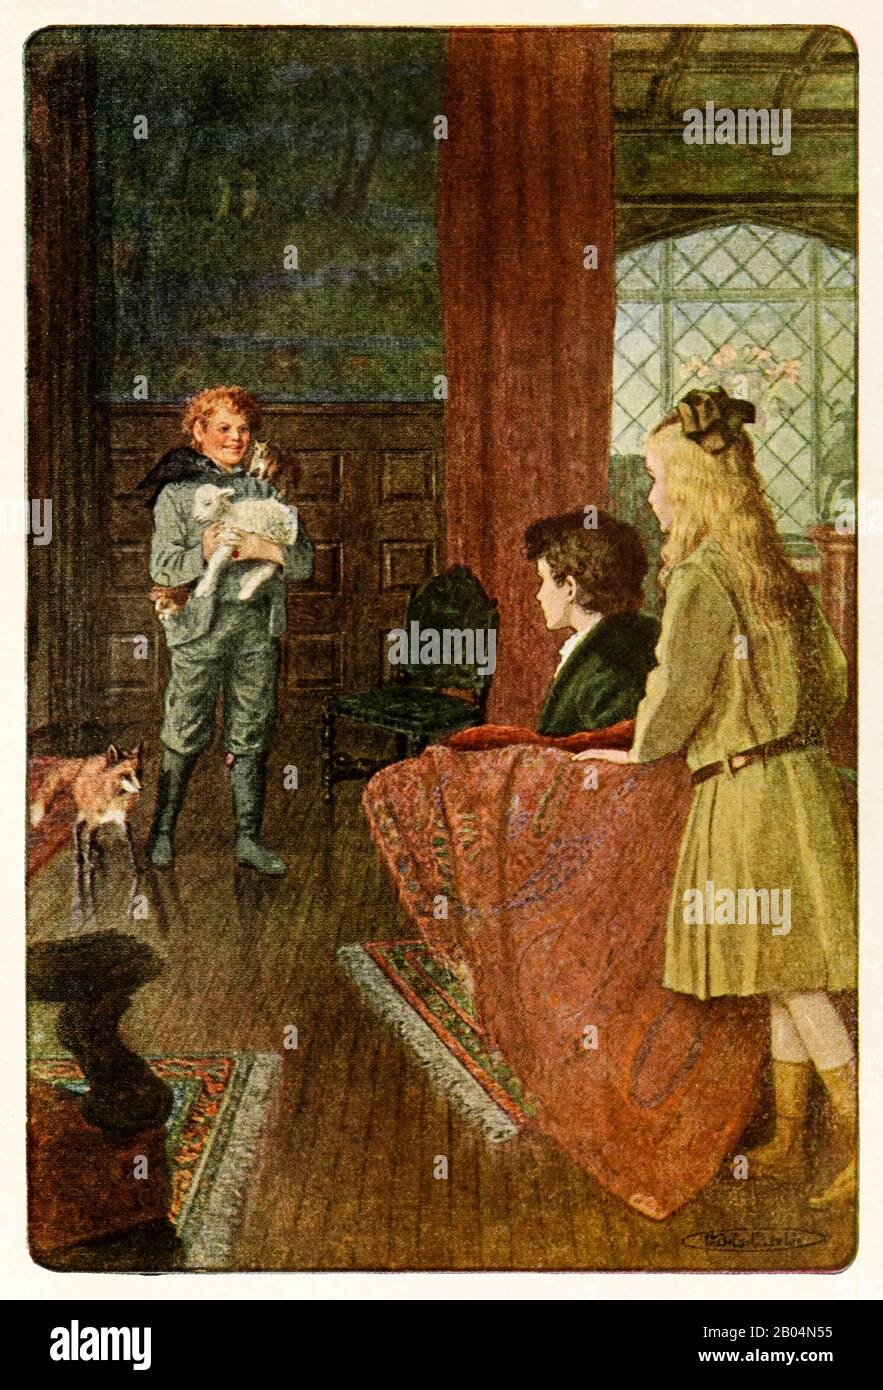 “Dickon came in smiling his nicest wide smile” from The Secret Garden by Frances Hodgson Burnett (1849-1924). Illustration shows Dickon holding a new born lamb with Captain the fox and the squirrels Nut and Shell meeting Colin in his wheelchair with Mary. Photograph of first American edition published in 1911 with illustrations by Maria Louise Kirk (1860-1938). Stock Photo